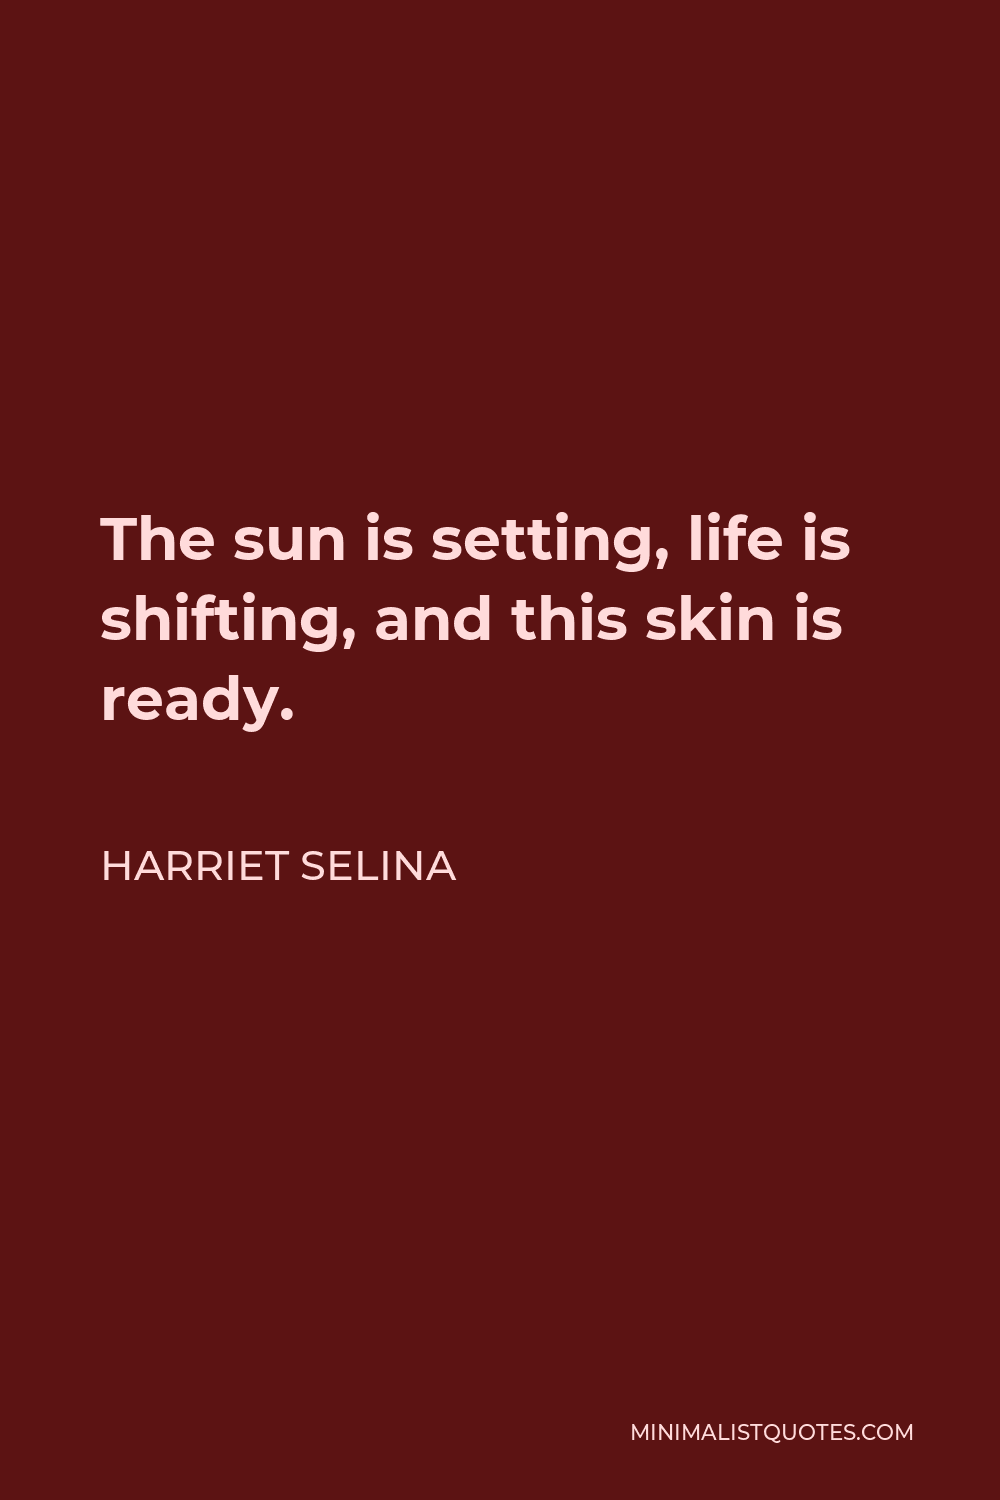 Harriet Selina Quote - The sun is setting, life is shifting, and this skin is ready.